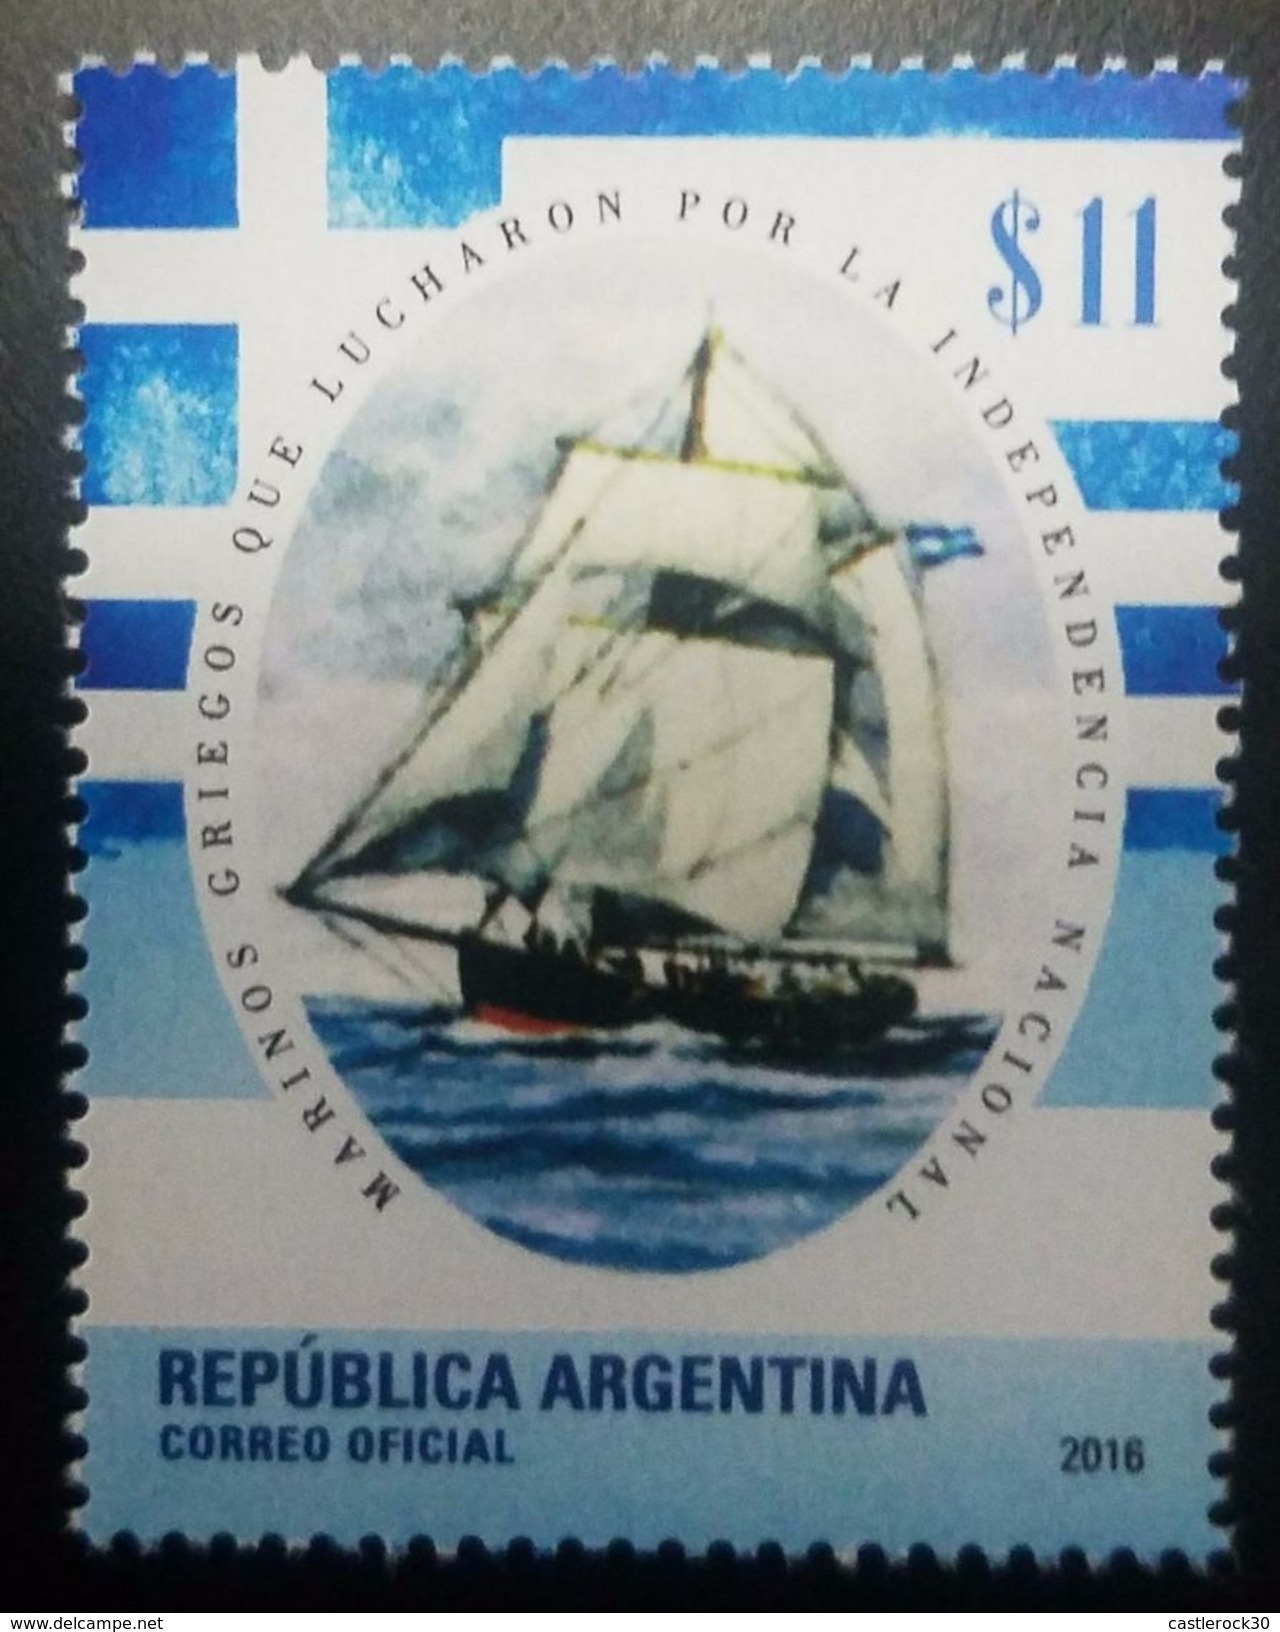 RL) 2016 ARGENTINA, GREEK MARINE THAT FIGHT FOR INDEPENDENCE, SHIP, FLAG, MILITARY, BLUE - Unused Stamps